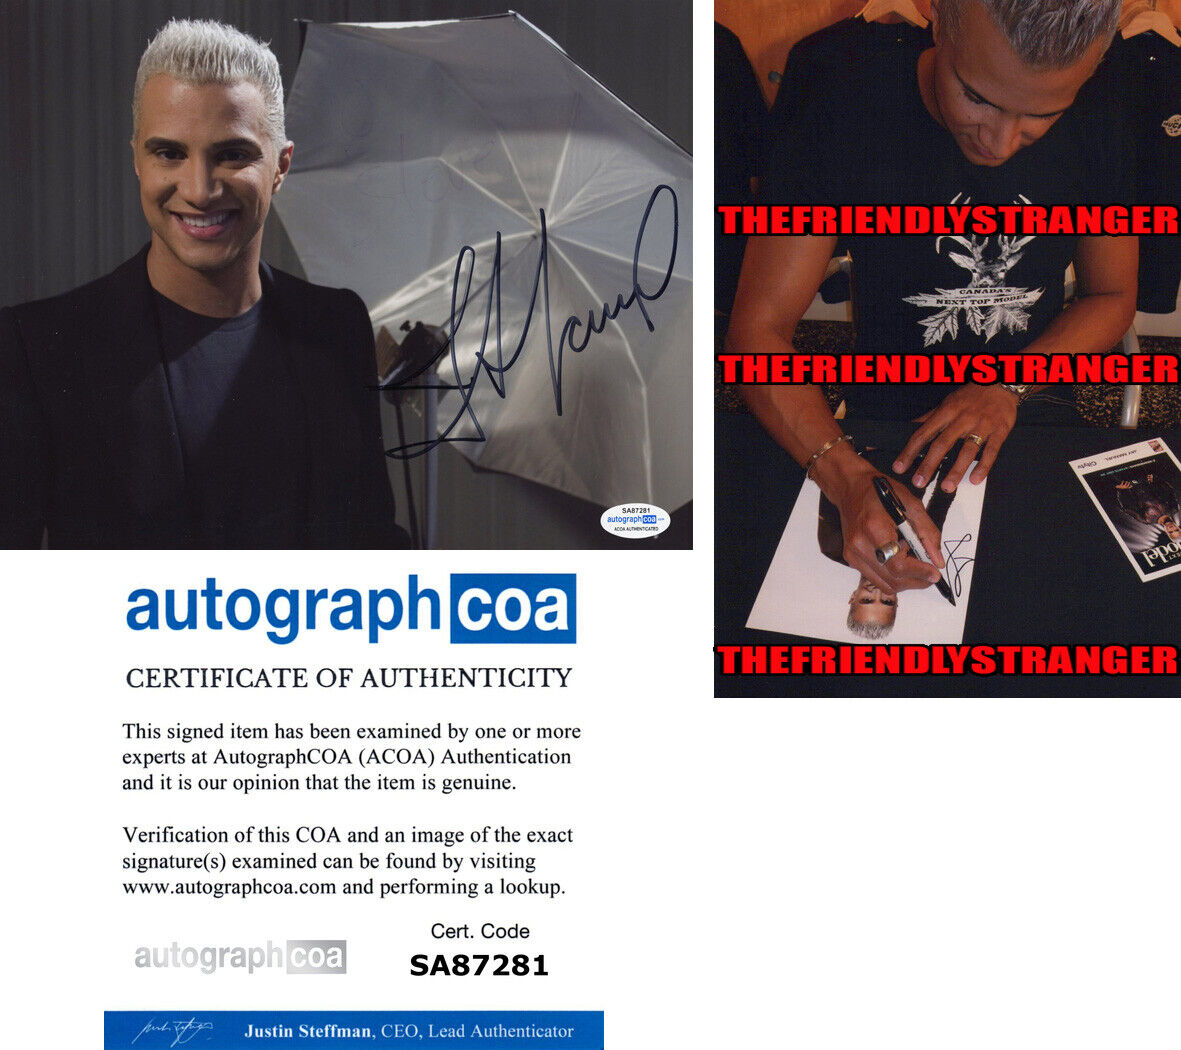 JAY MANUEL signed Autographed 8X10 Photo Poster painting PROOF America's Next Top Model ACOA COA